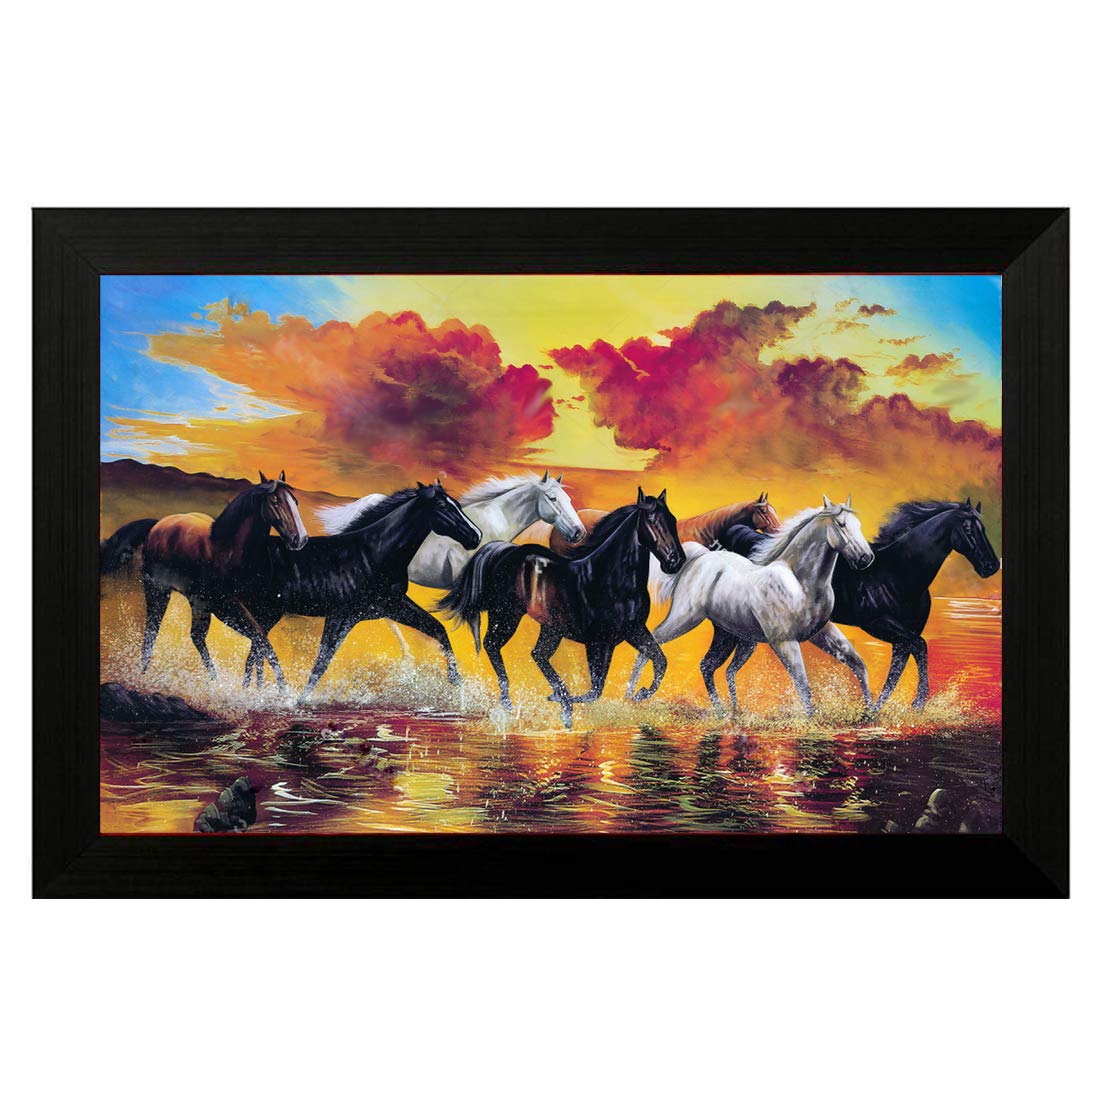 3d Wallpaper Seven Horses Running For Home.Office.Drawing Room.Living  Room.Gift Art-Poster (14x20 Inch) Size